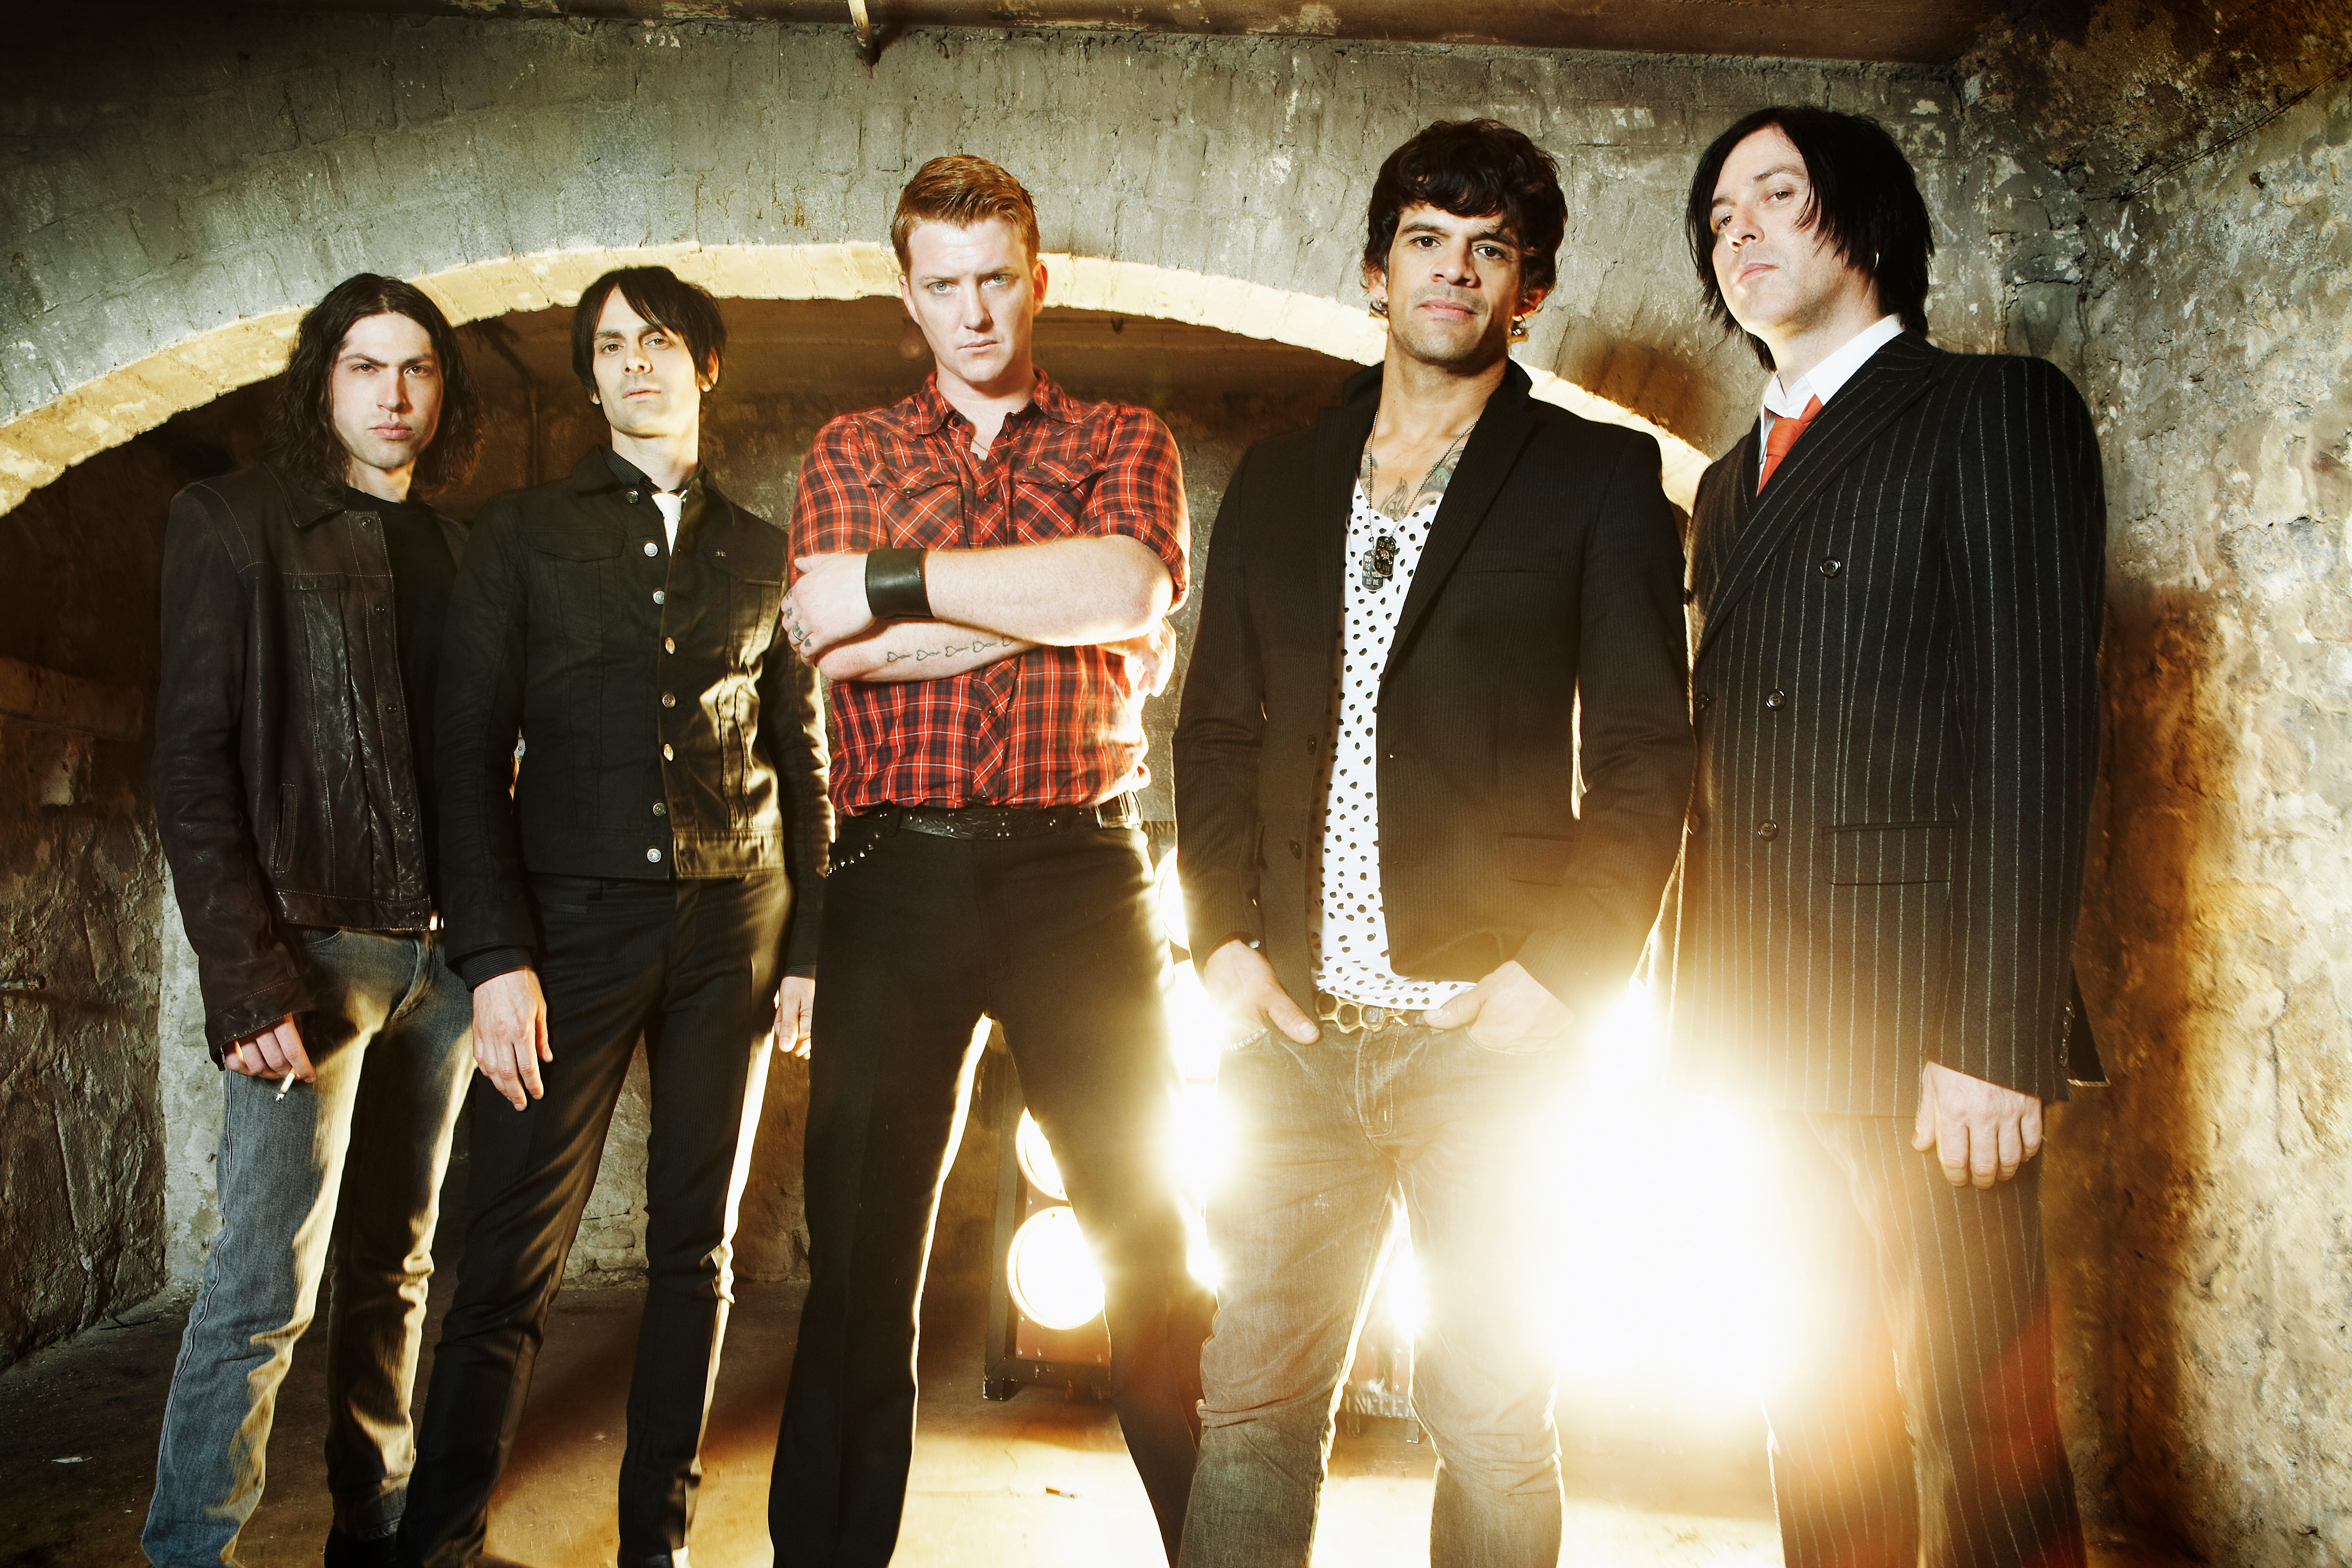 music, queens of the stone age